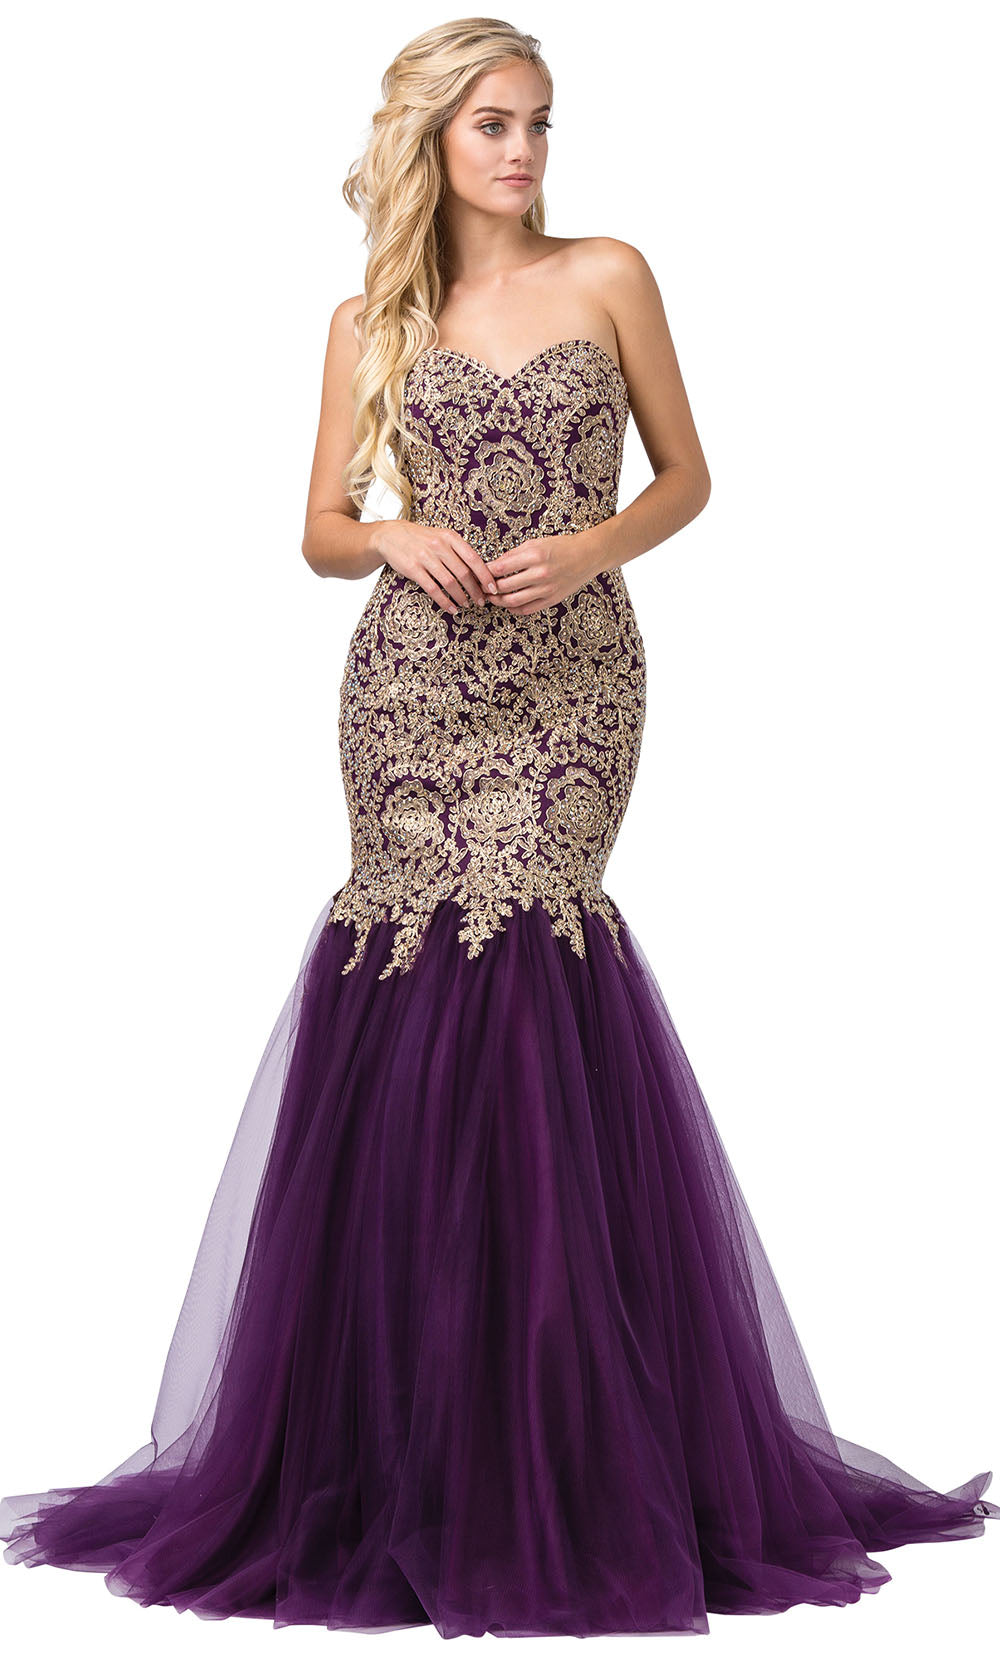 Dancing Queen - 9932 Strapless Beaded Lace Applique Mermaid Gown In Purple